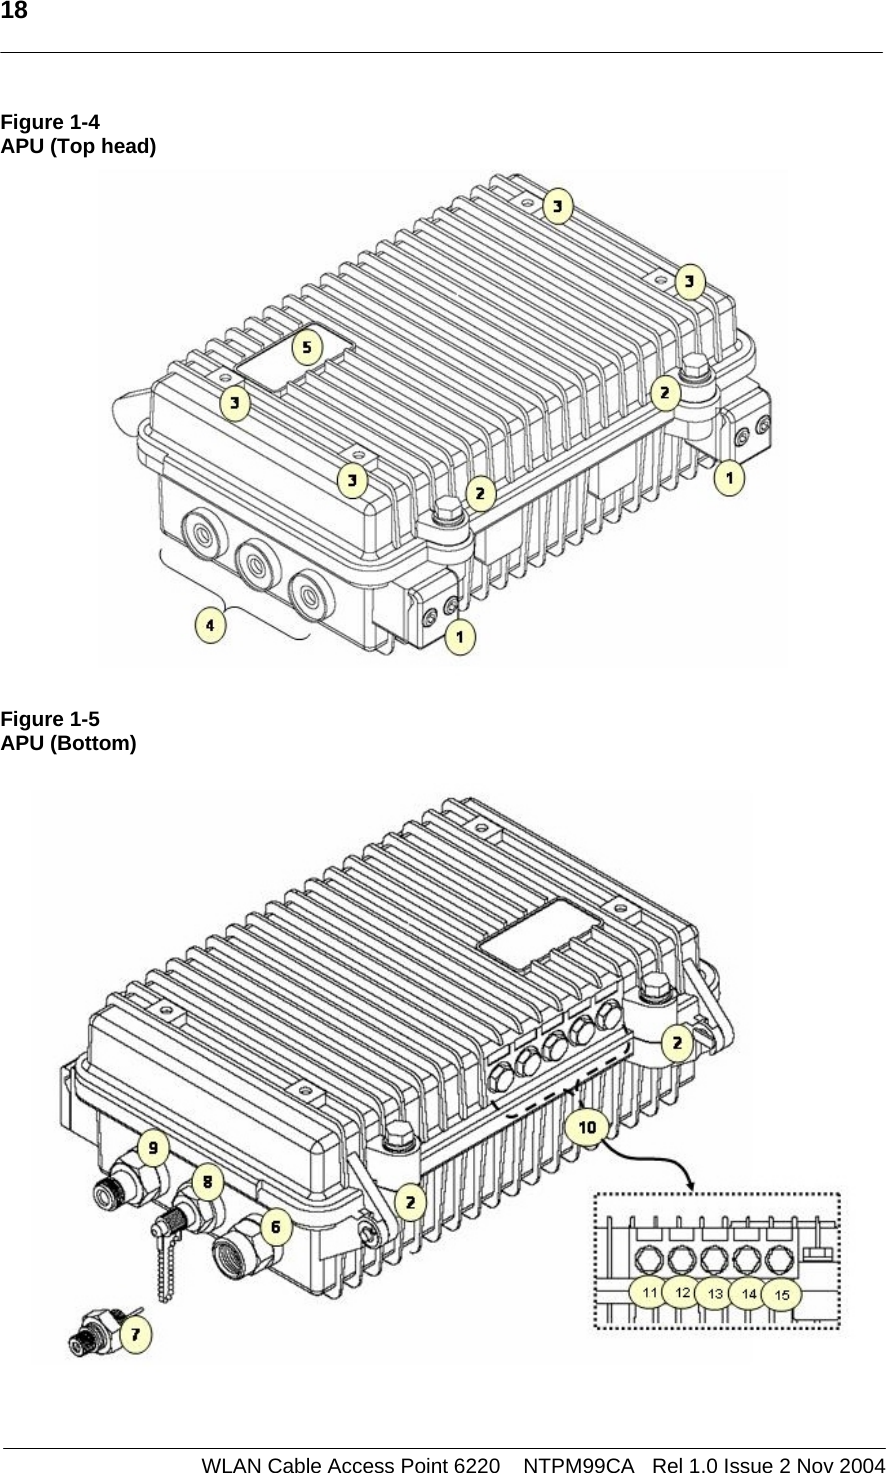   18     WLAN Cable Access Point 6220    NTPM99CA   Rel 1.0 Issue 2 Nov 2004 Figure 1-4 APU (Top head)   Figure 1-5 APU (Bottom)     